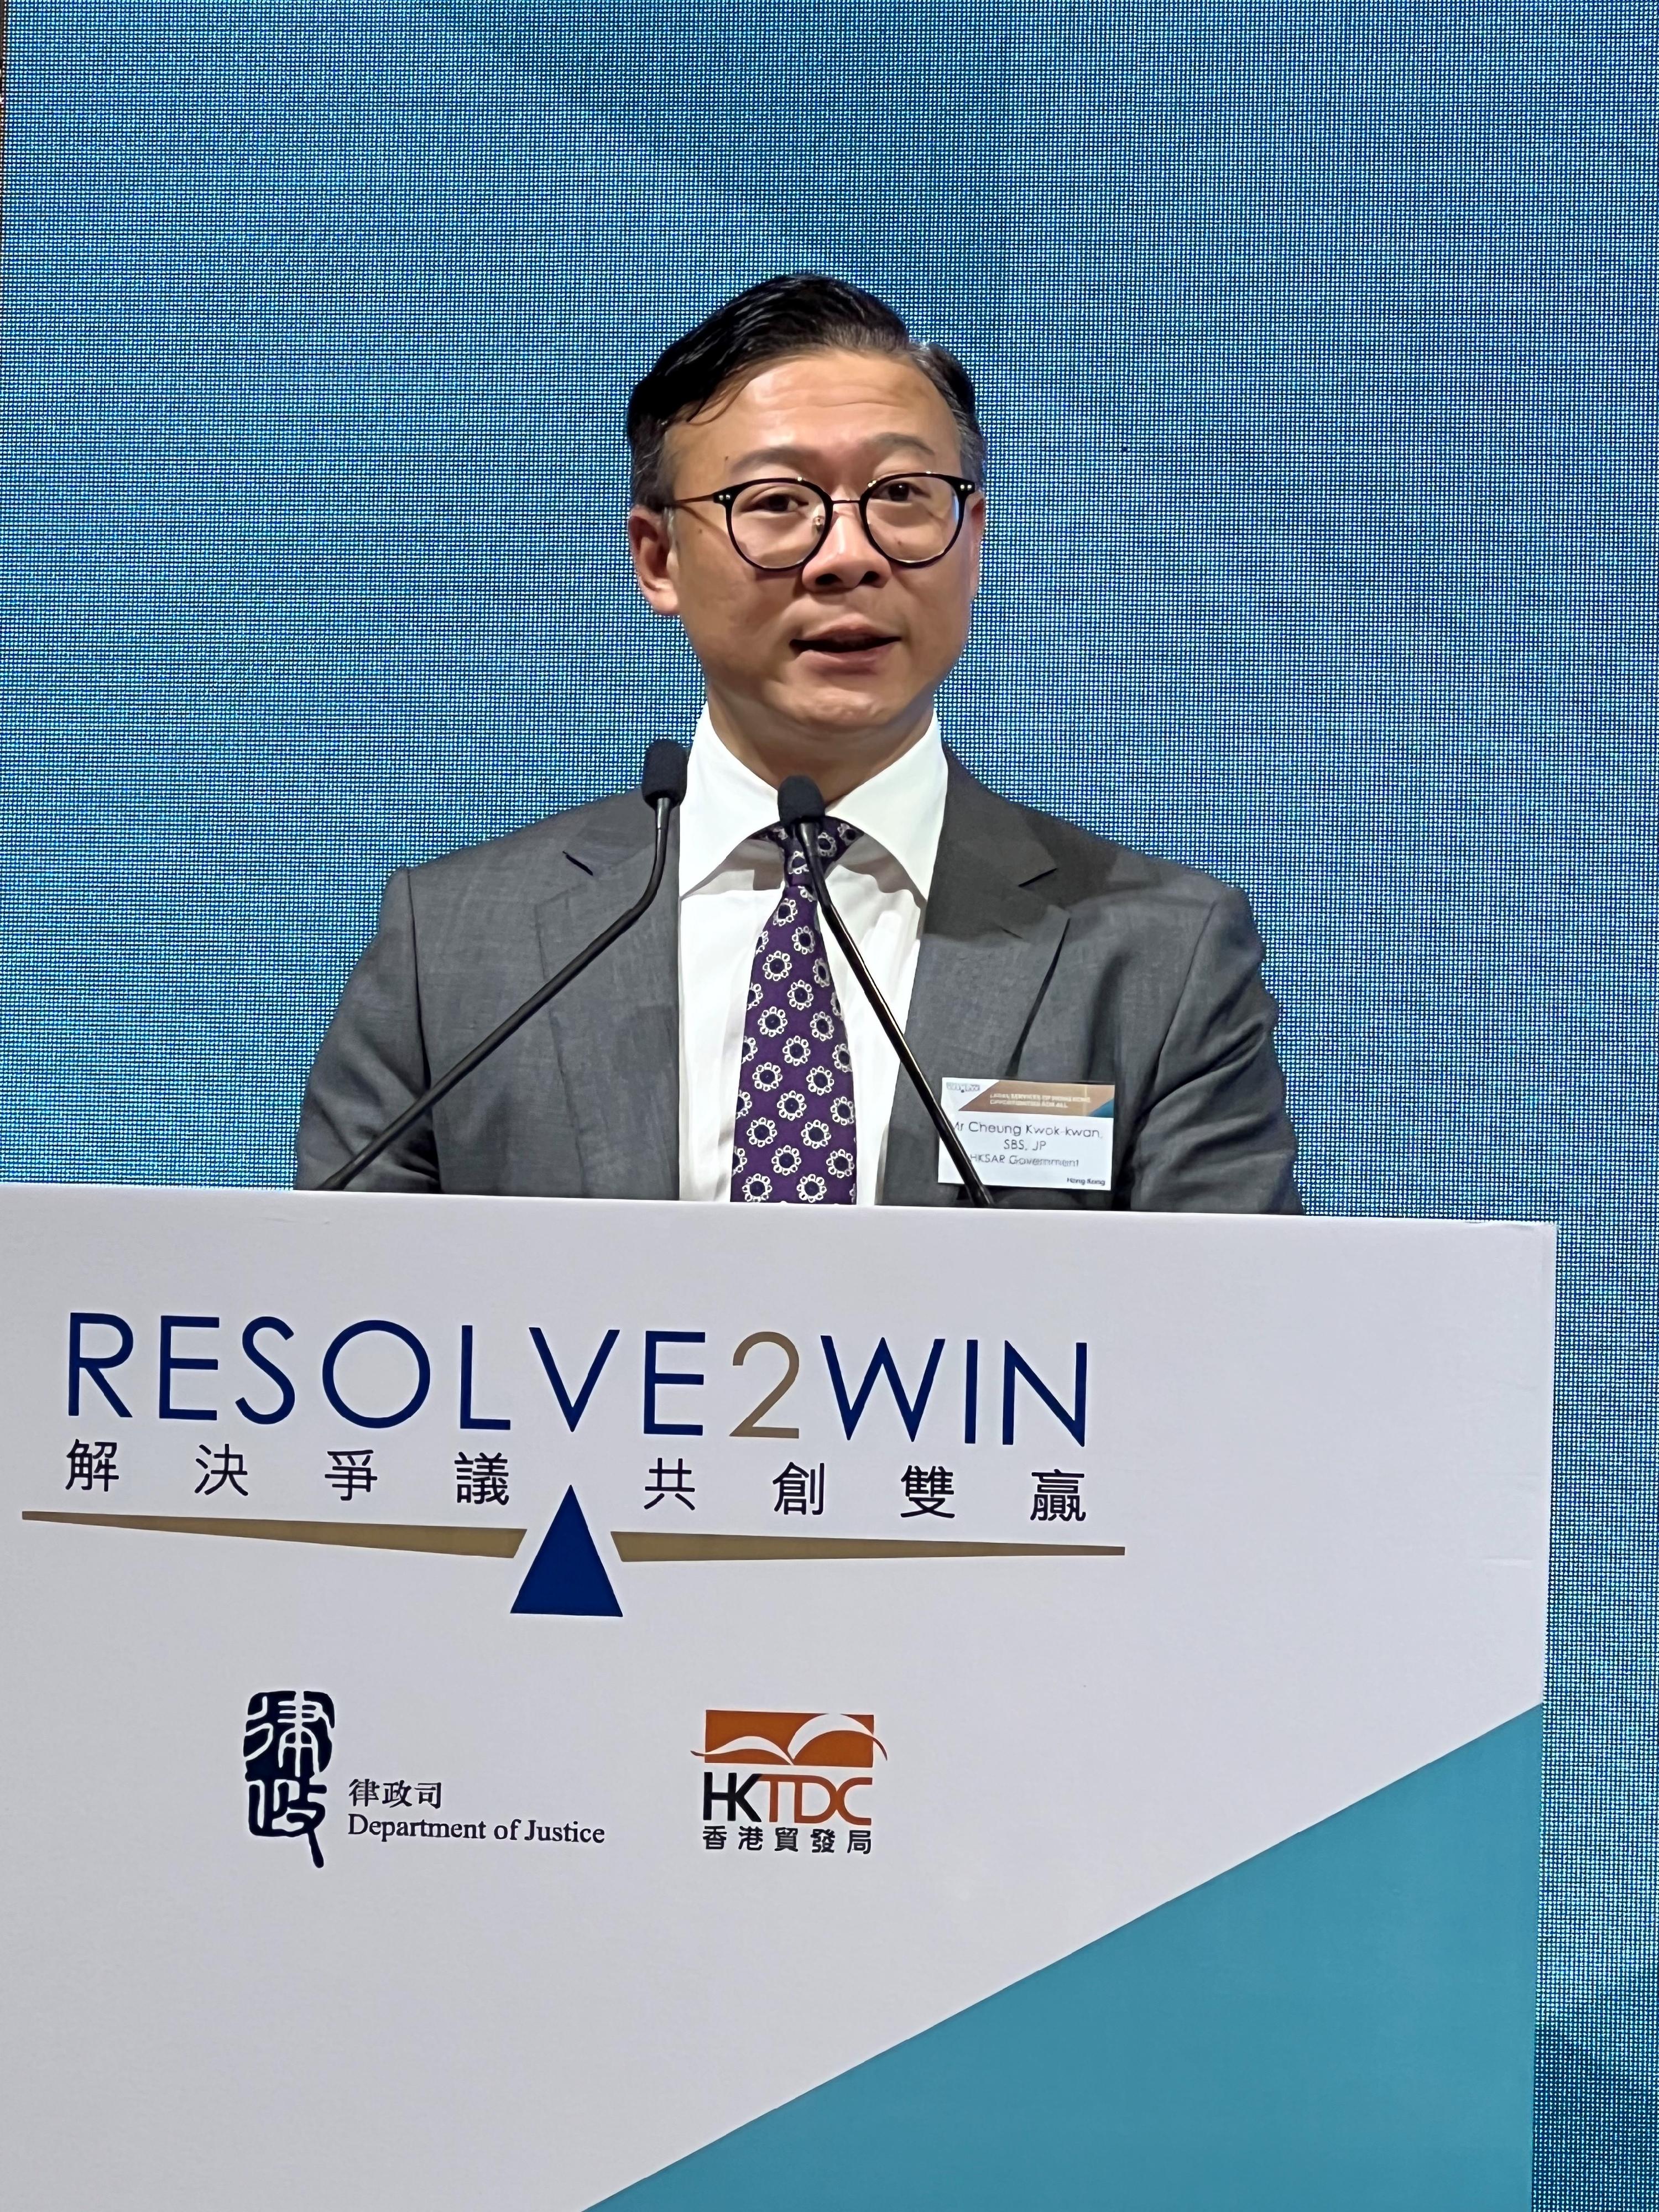 The Deputy Secretary for Justice, Mr Cheung Kwok-kwan, attended the "Resolve2Win - Legal Services of Hong Kong, Opportunities for All", an international promotional campaign co-organised by the Department of Justice and the Hong Kong Trade Development Council, in Bangkok, Thailand, today (March 16). Photo shows Mr Cheung delivering his opening remarks.